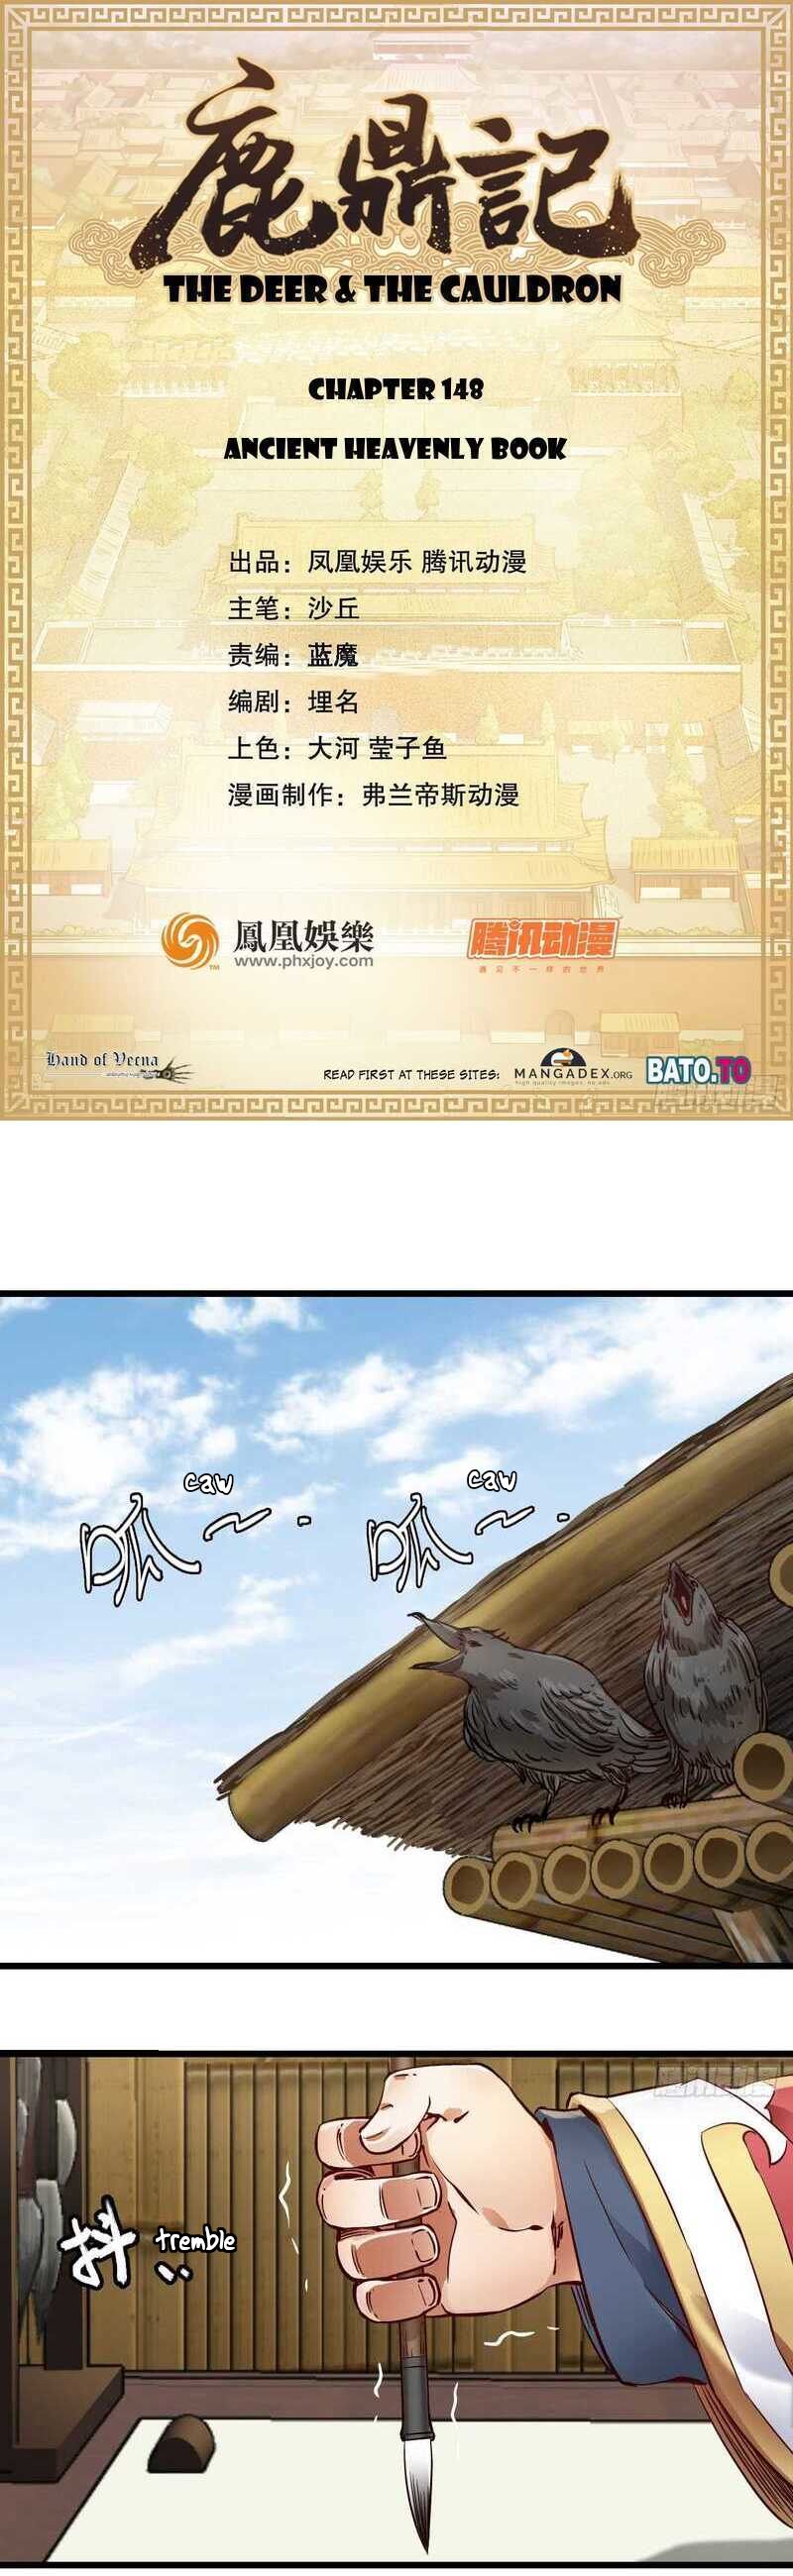 The Deer And The Cauldron Chapter 148: Ancient Heavenly Book - Picture 1